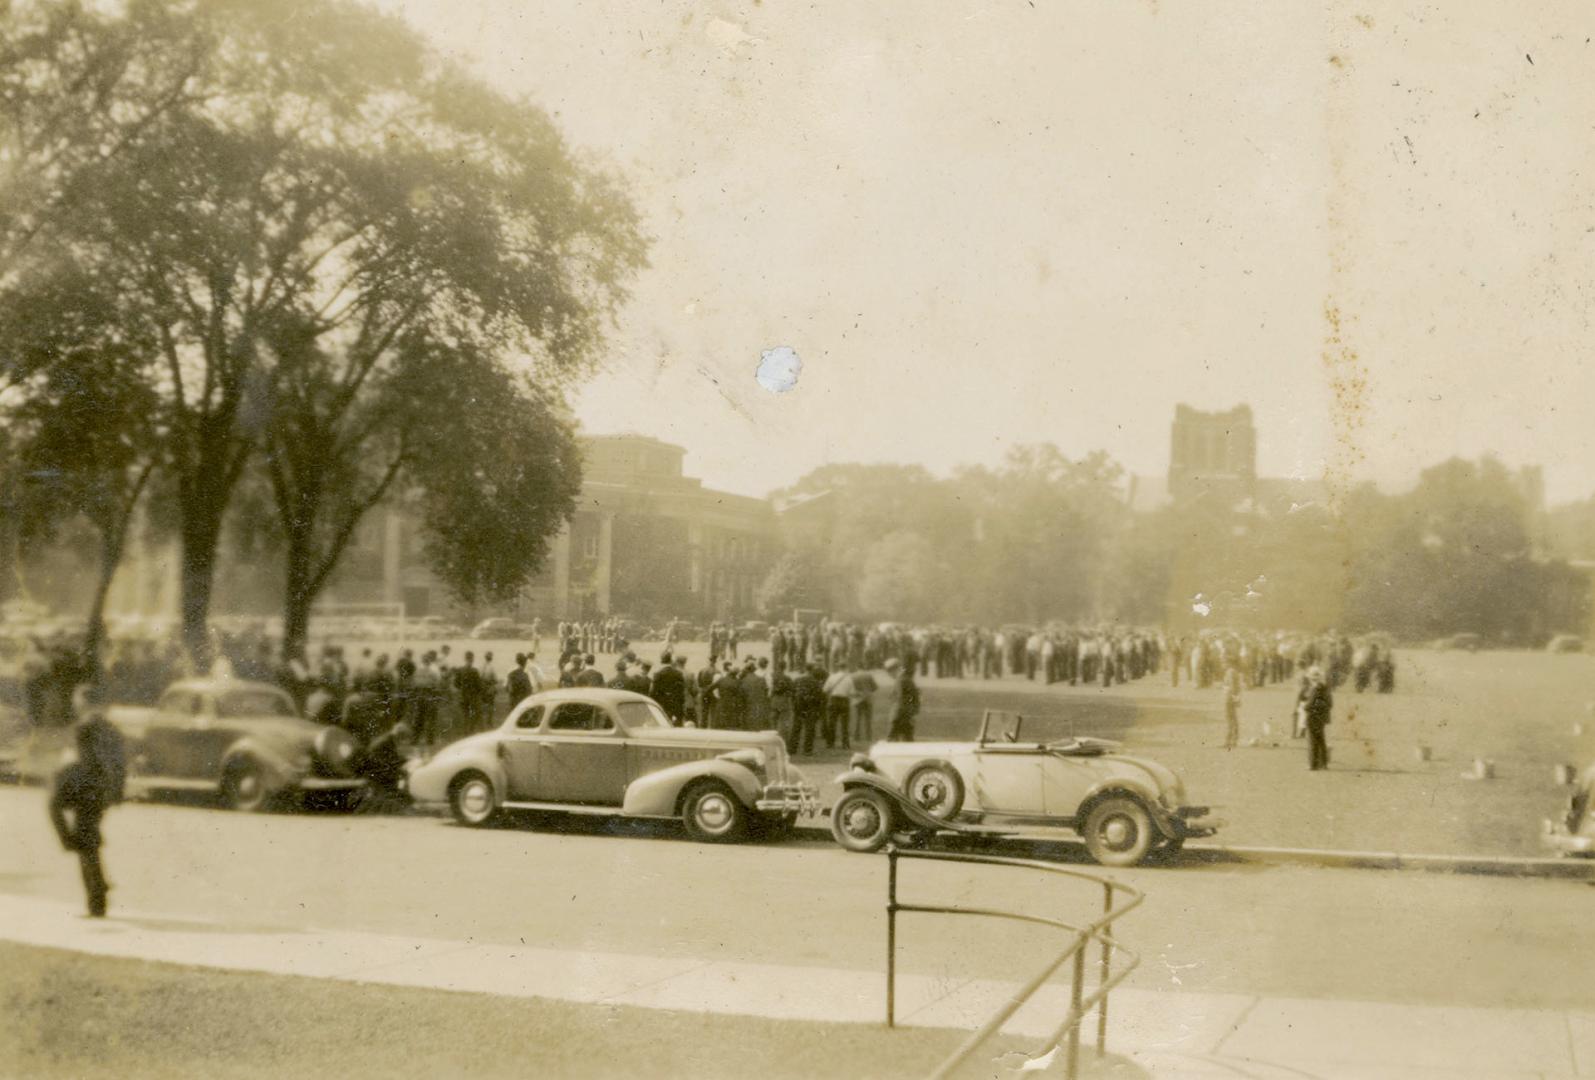 The army on the University of Toronto campus, gas masks in foreground